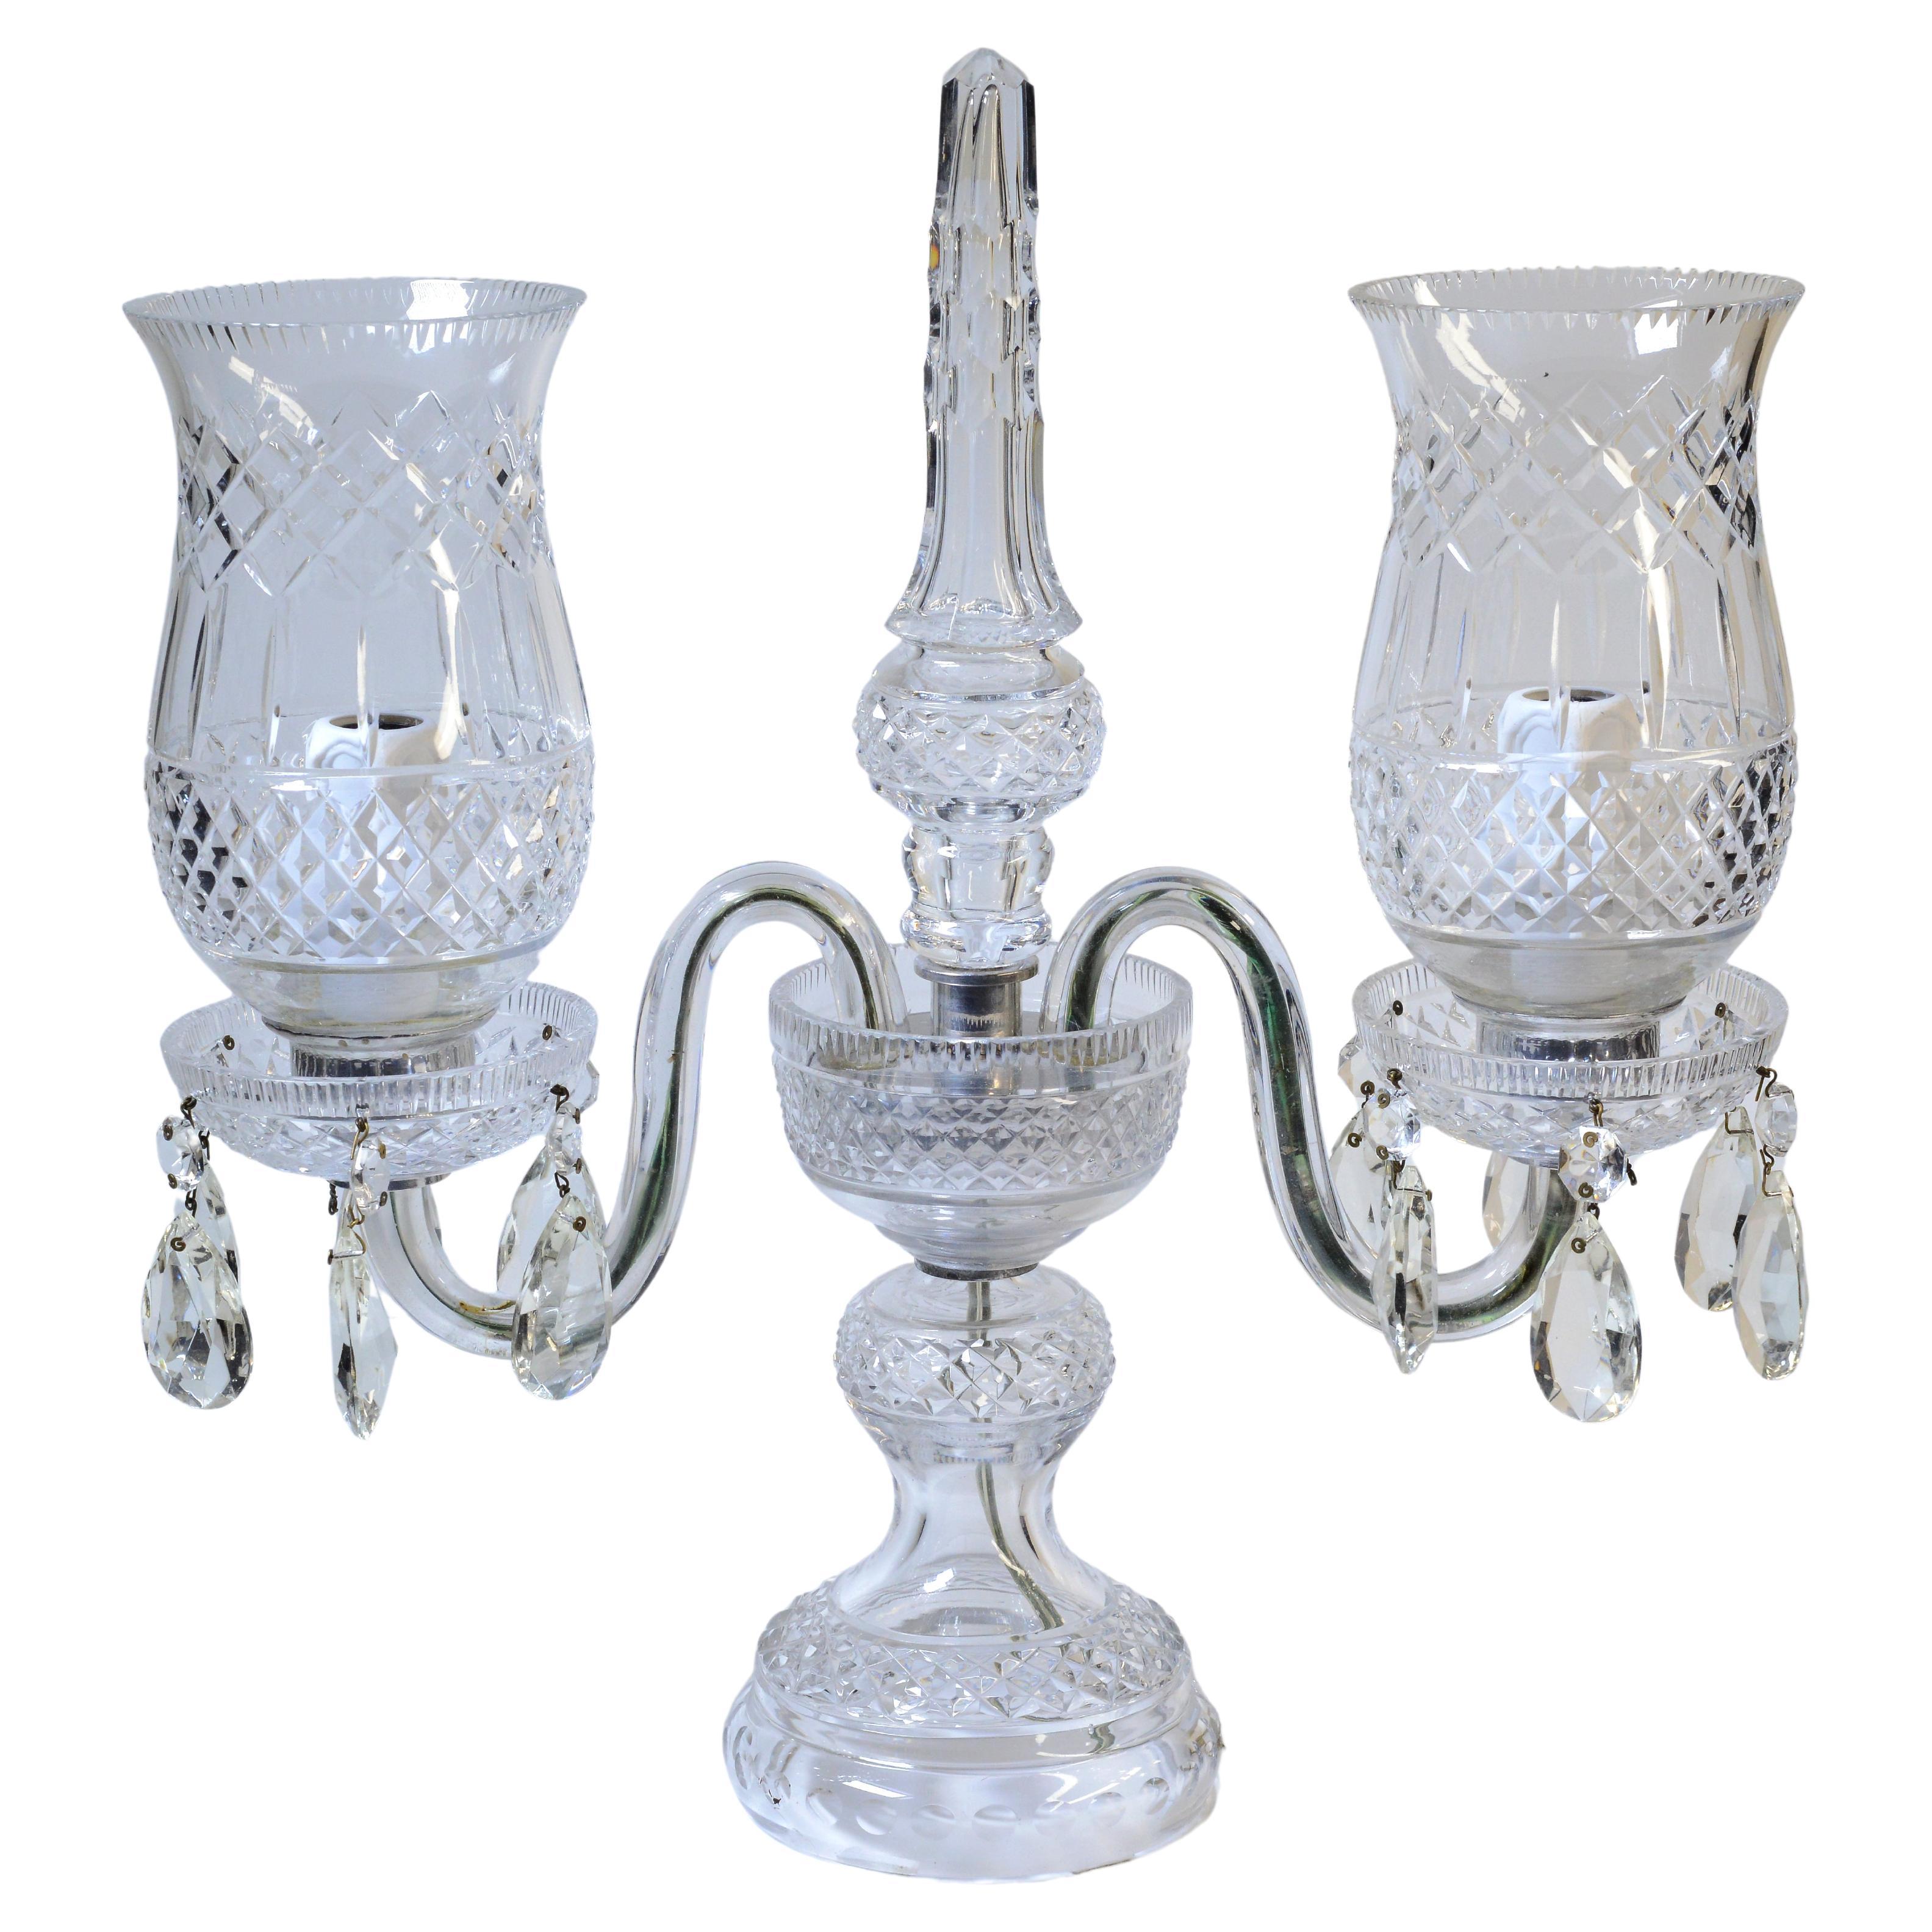 Vintage Crystal Candelabra Double Hurricane Lamp Baccarat style 20th century For Sale